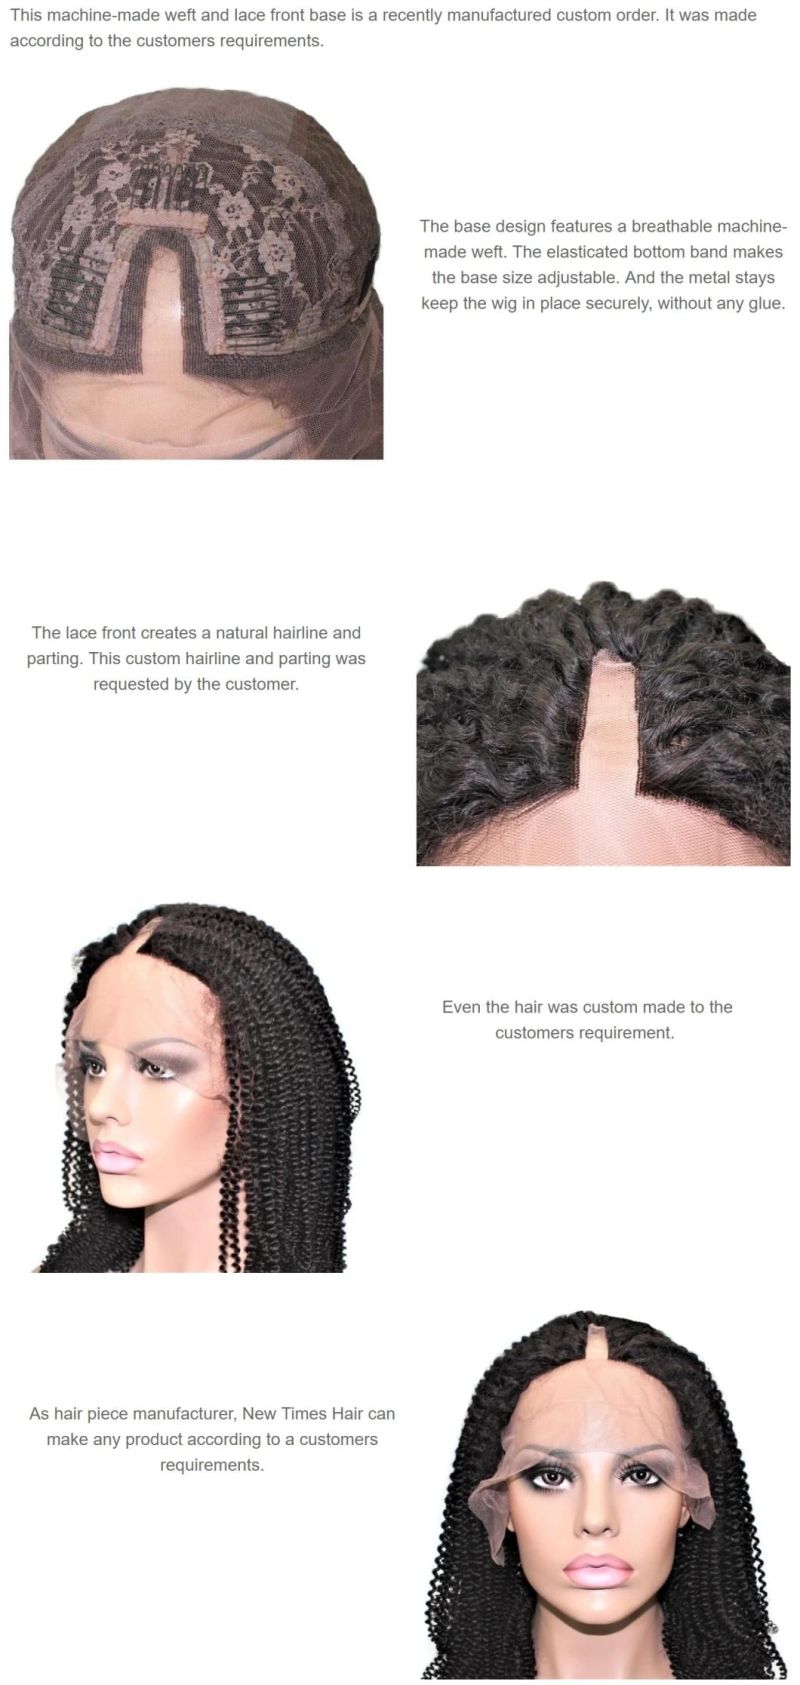 Custom Lace and Machine-Made Weft High Quality Women′s Wig